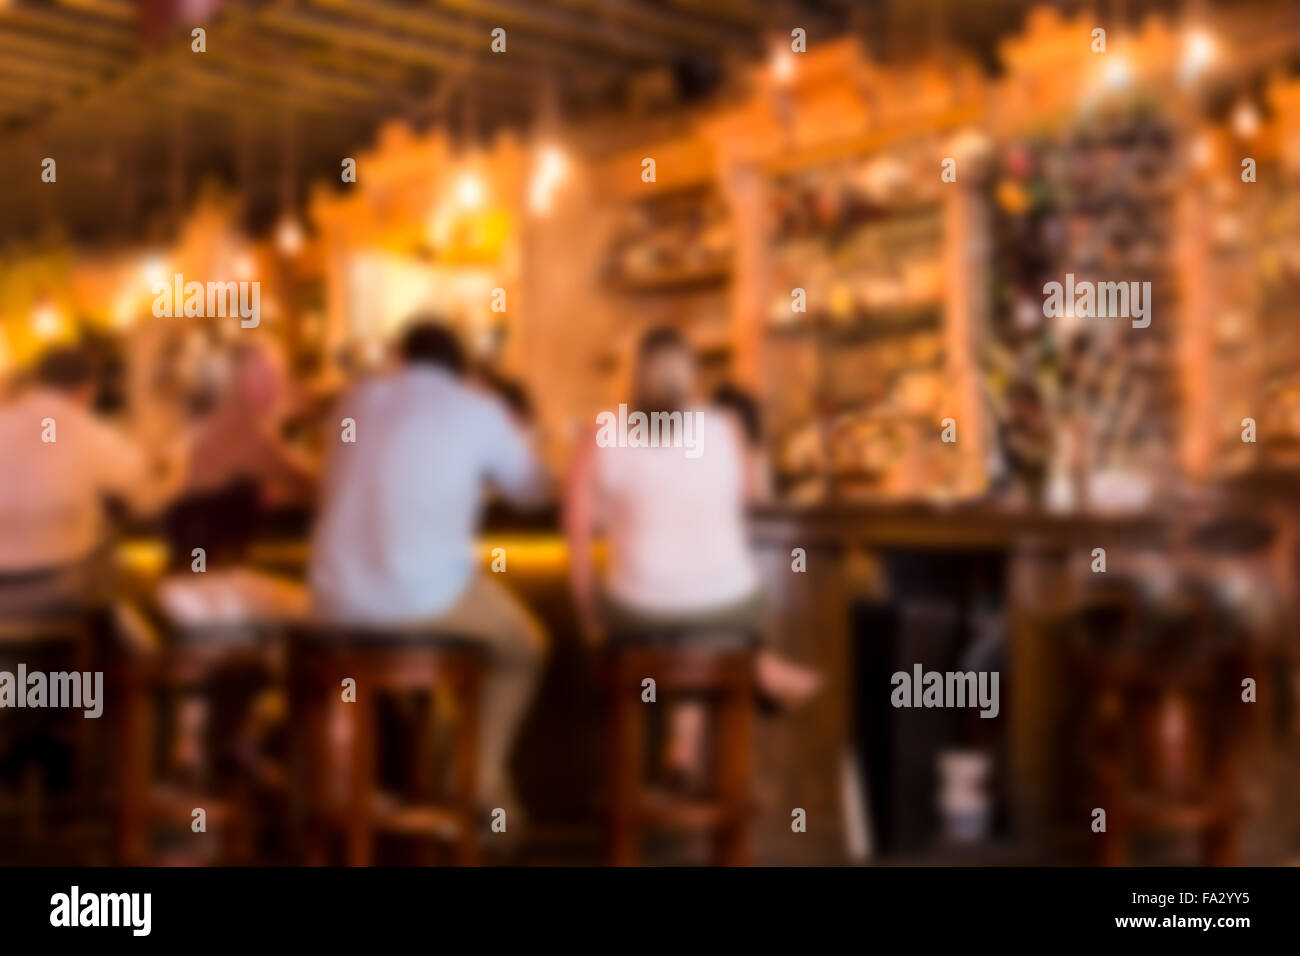 Defocused blur of typical bar with blurred people Stock Photo